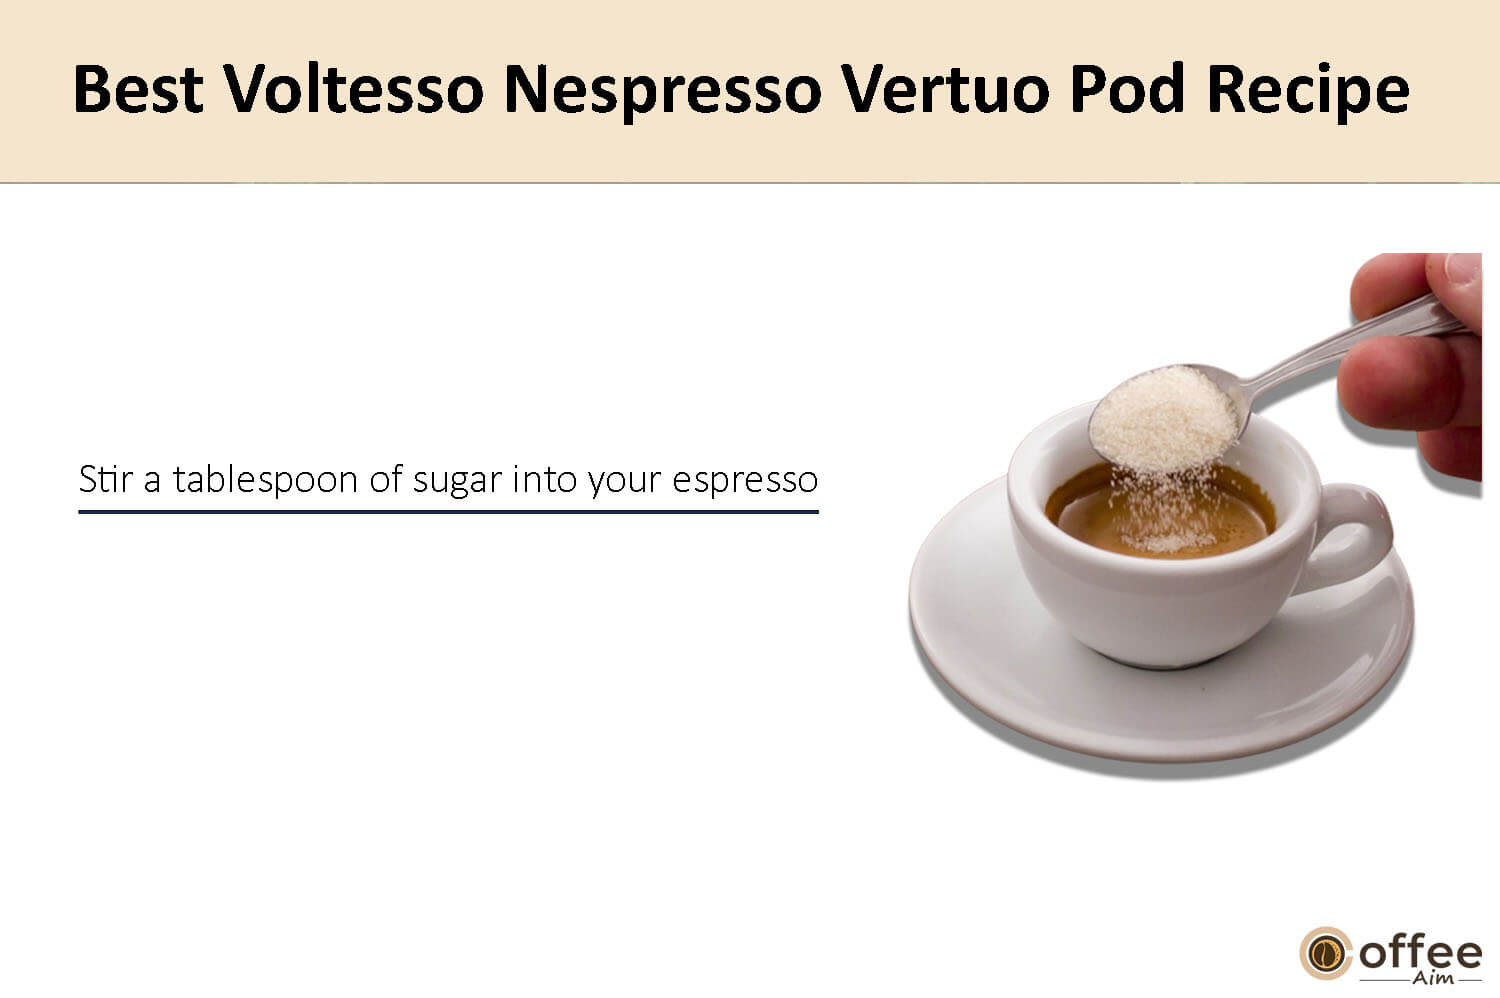 In this image, I clarify the preparation instructions for crafting the finest Voltesso Nespresso Vertuo coffee pod.